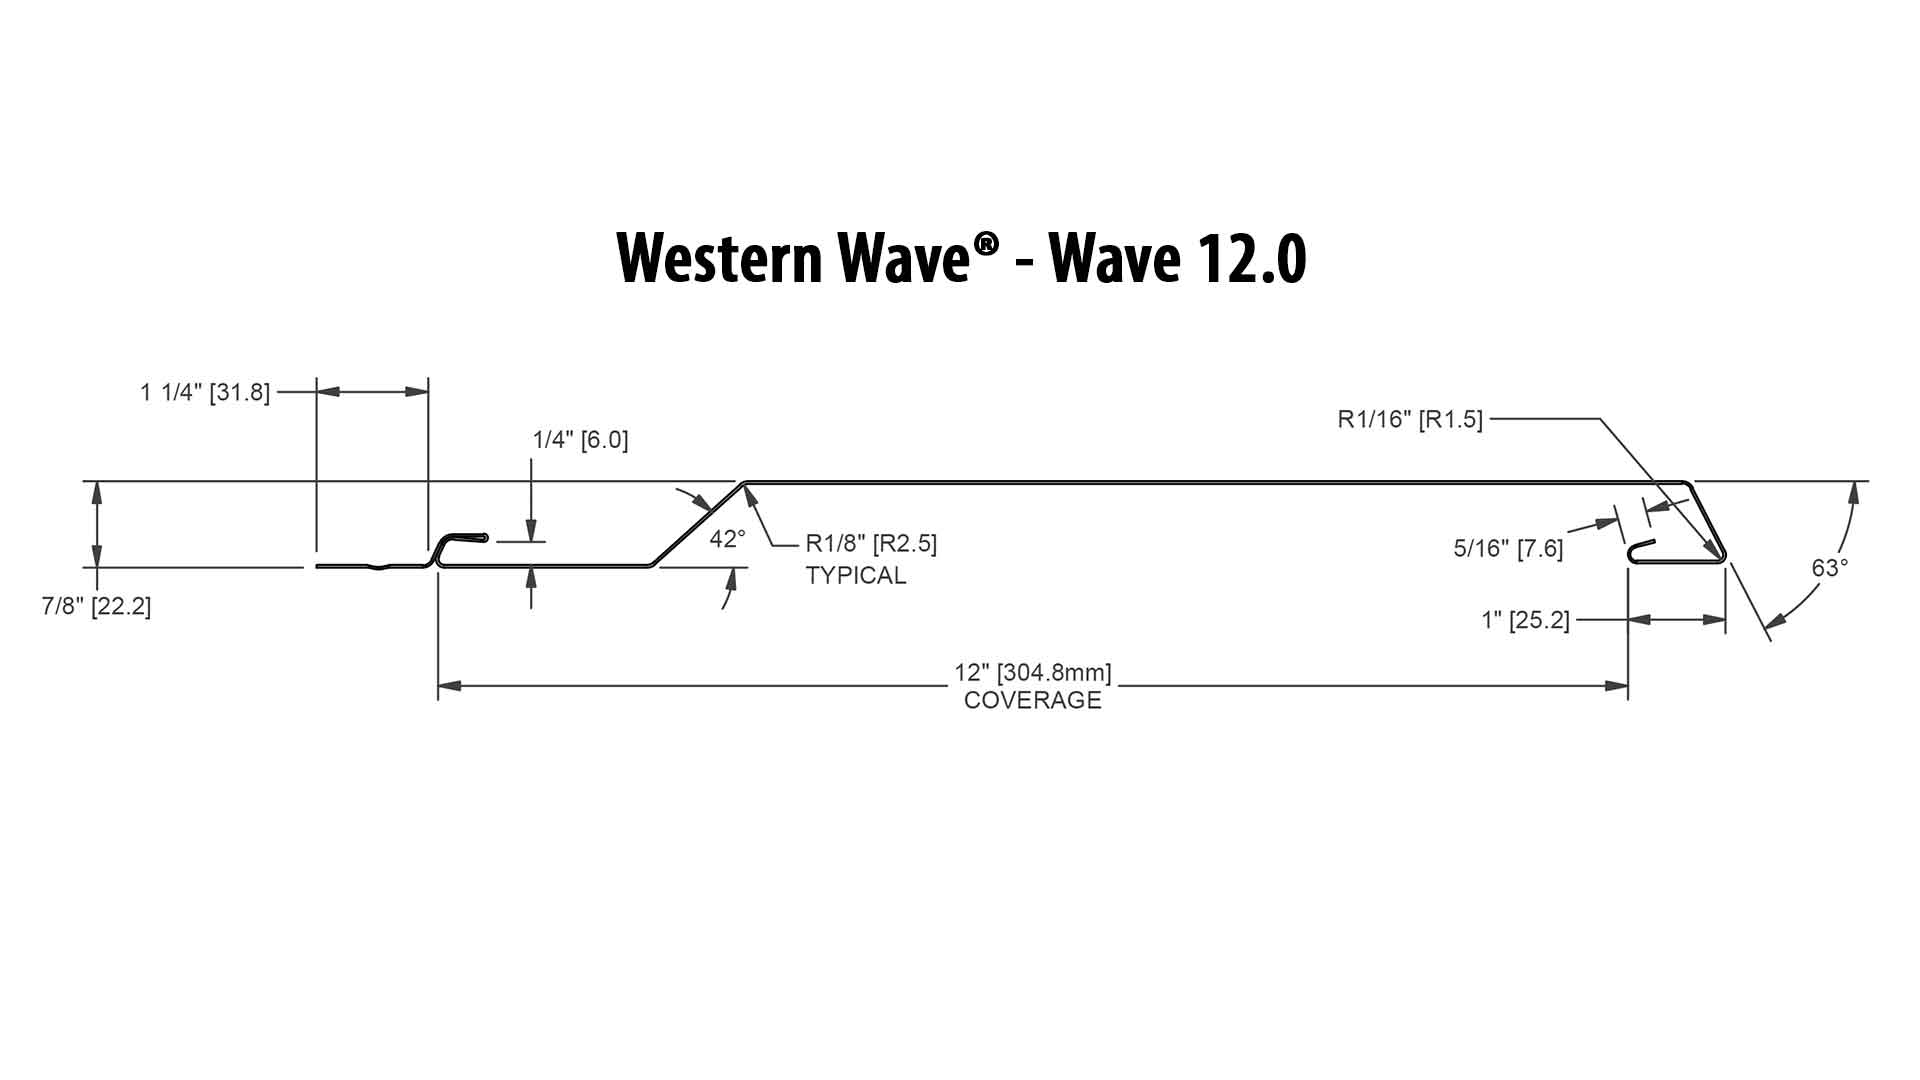 Western Wave - 12.0 Line Drawing